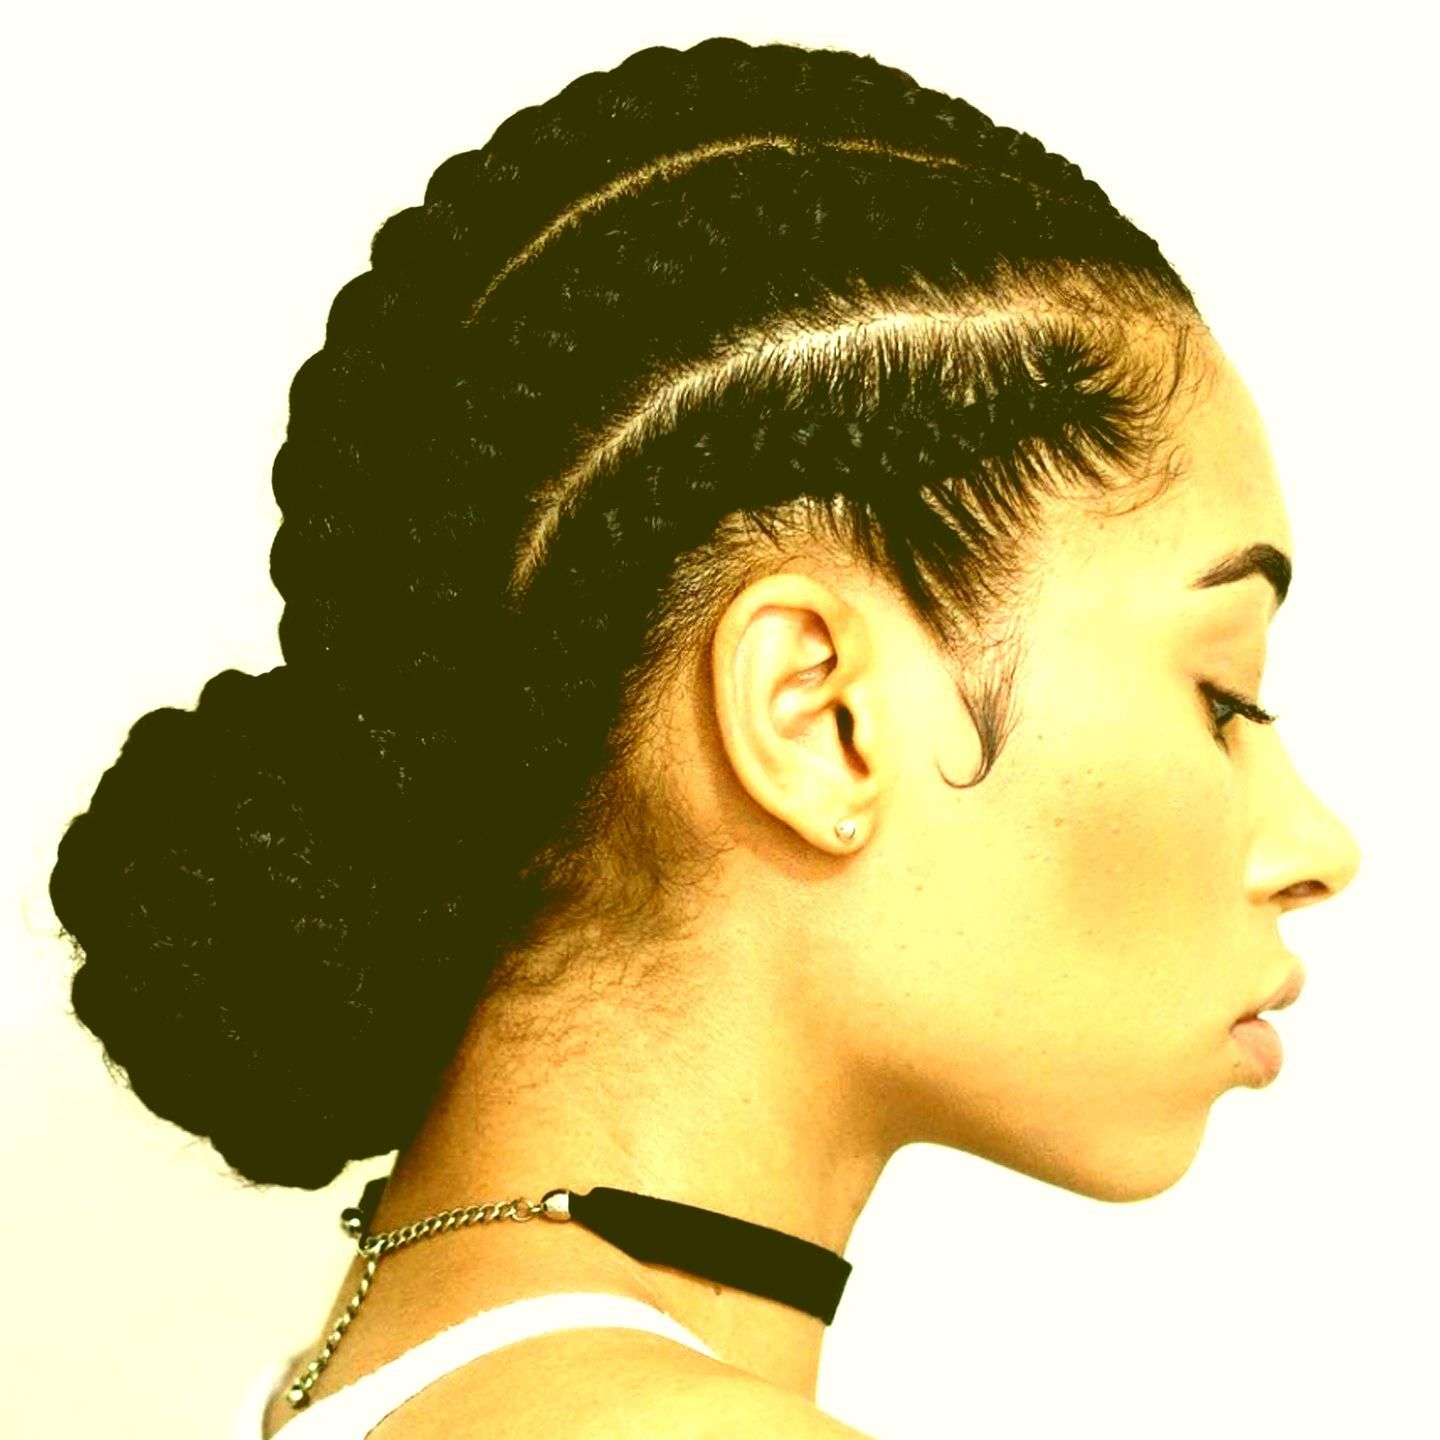 2020 Mohawk Updo Hairstyles For Women Within Women Hairstyle : Cornrow Braid Styles For Natural Hair To (View 17 of 20)